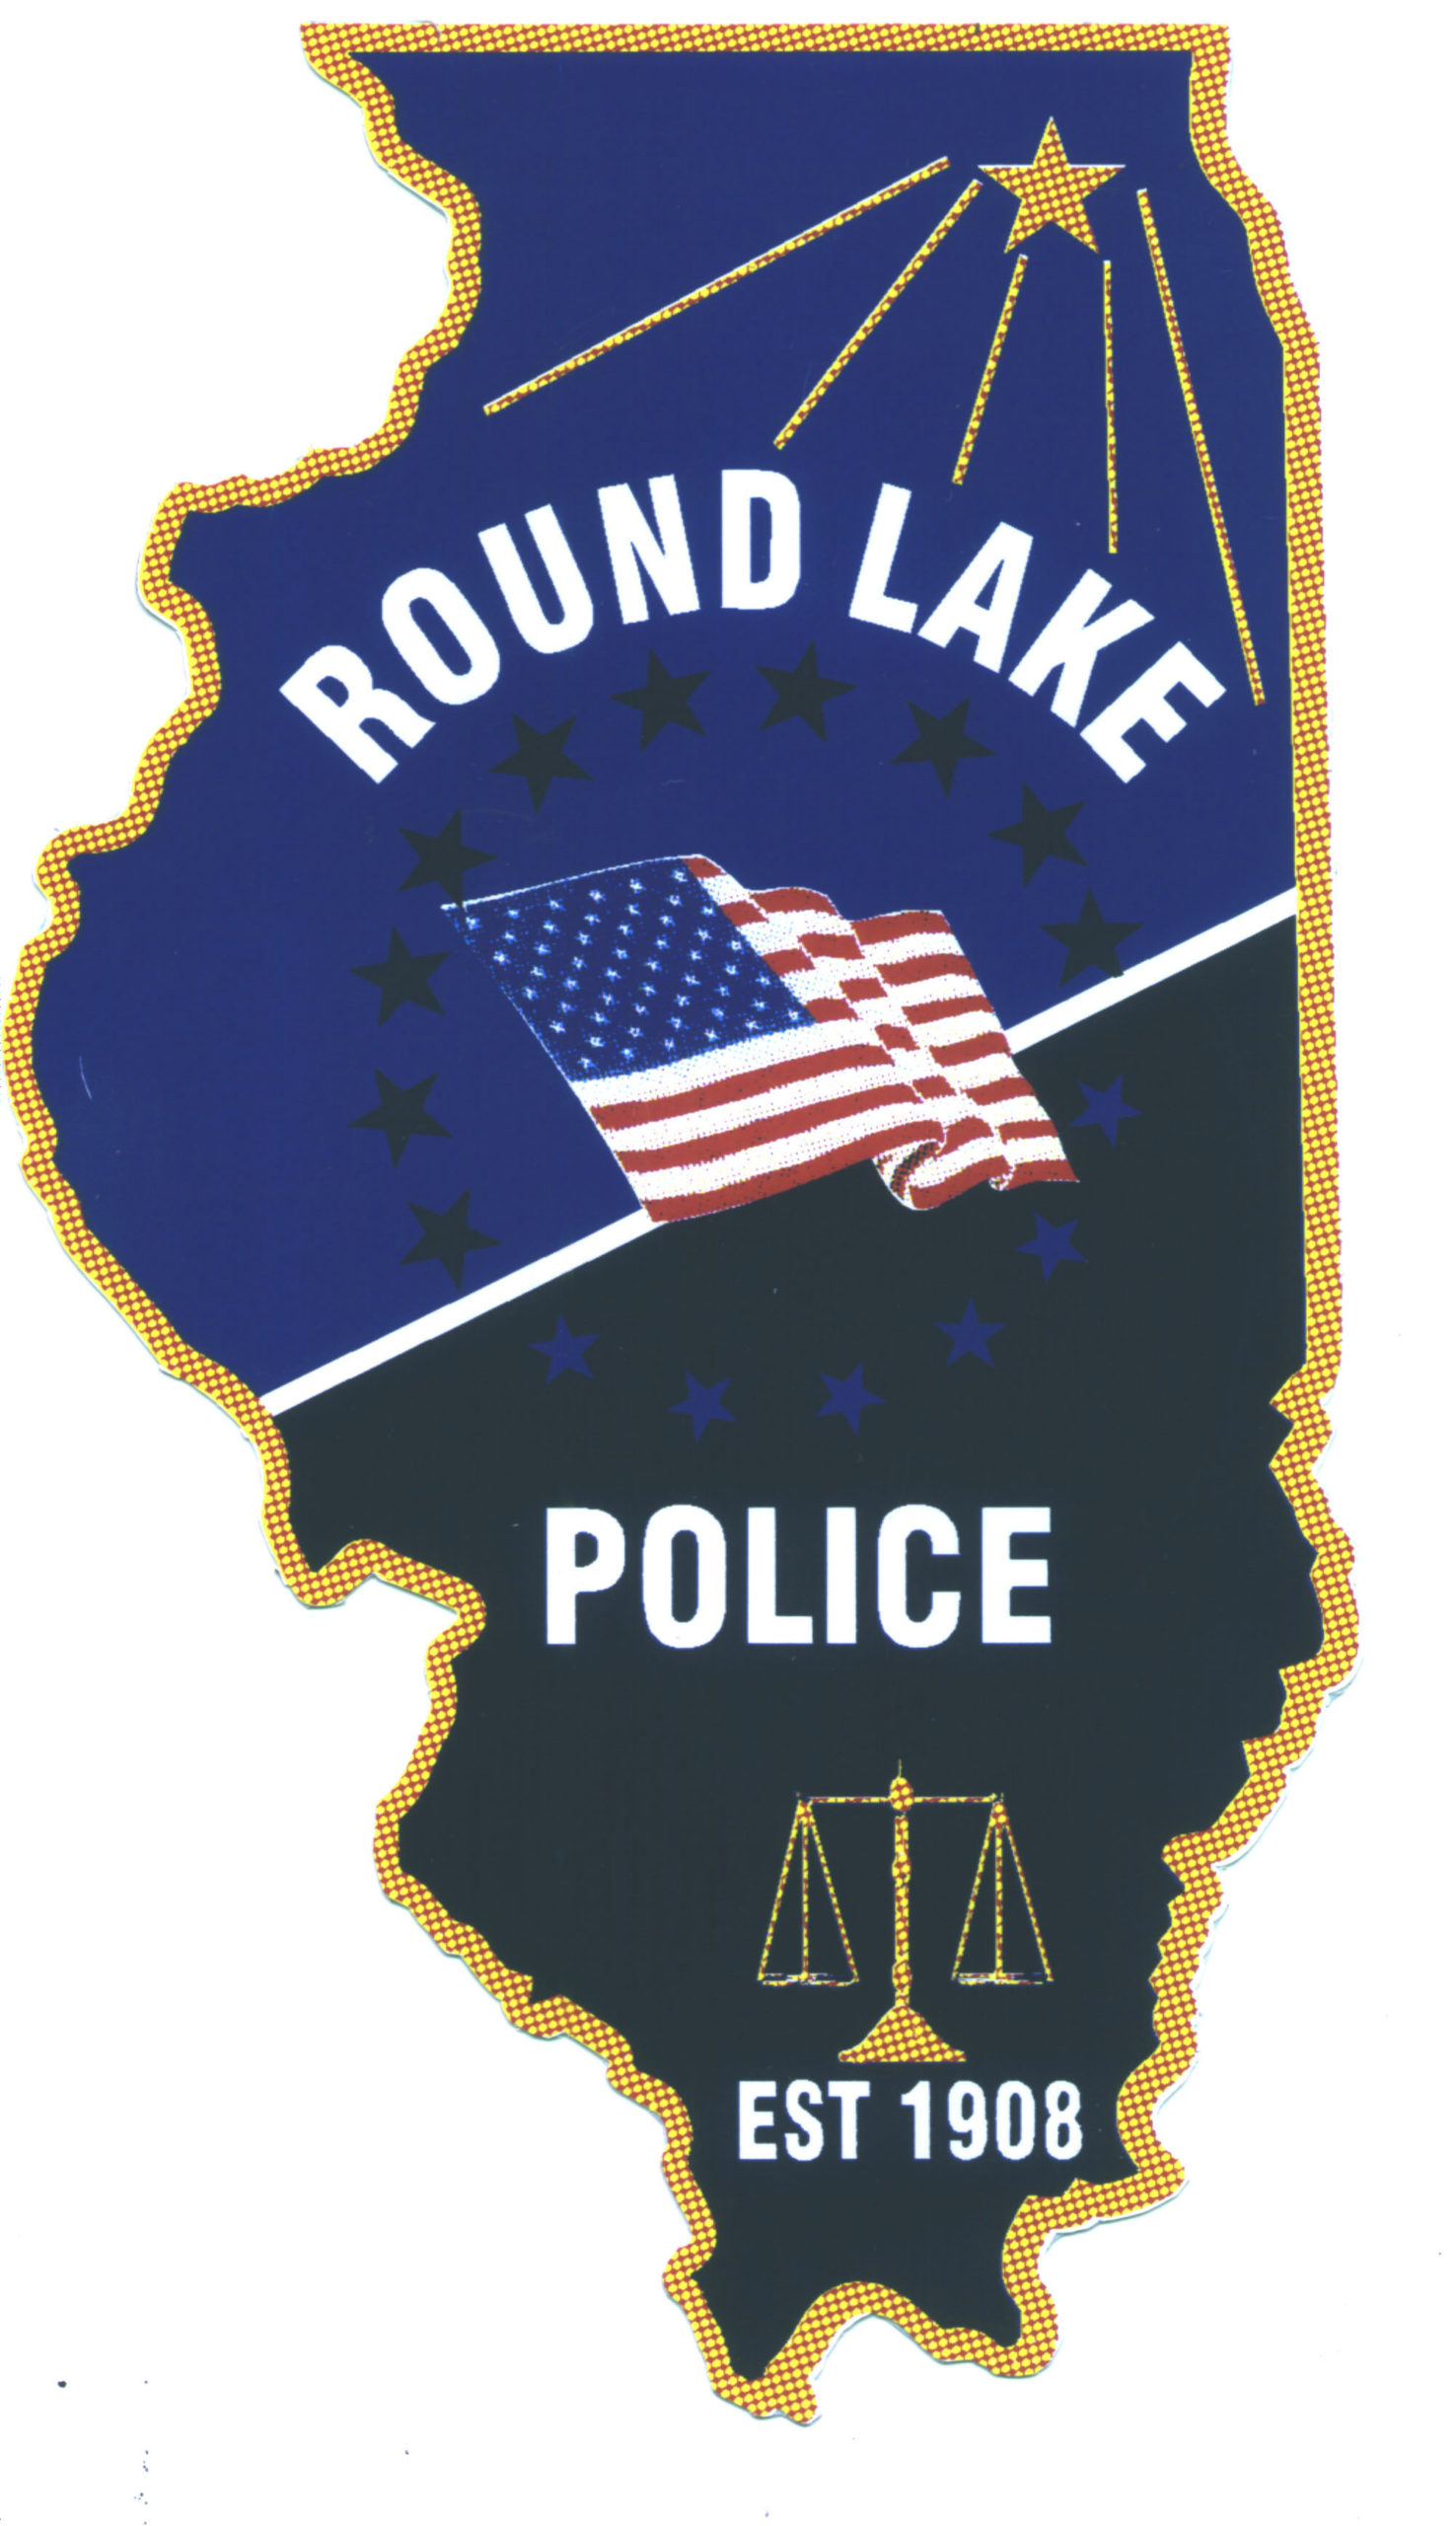 Round Lake Police Department logo patch